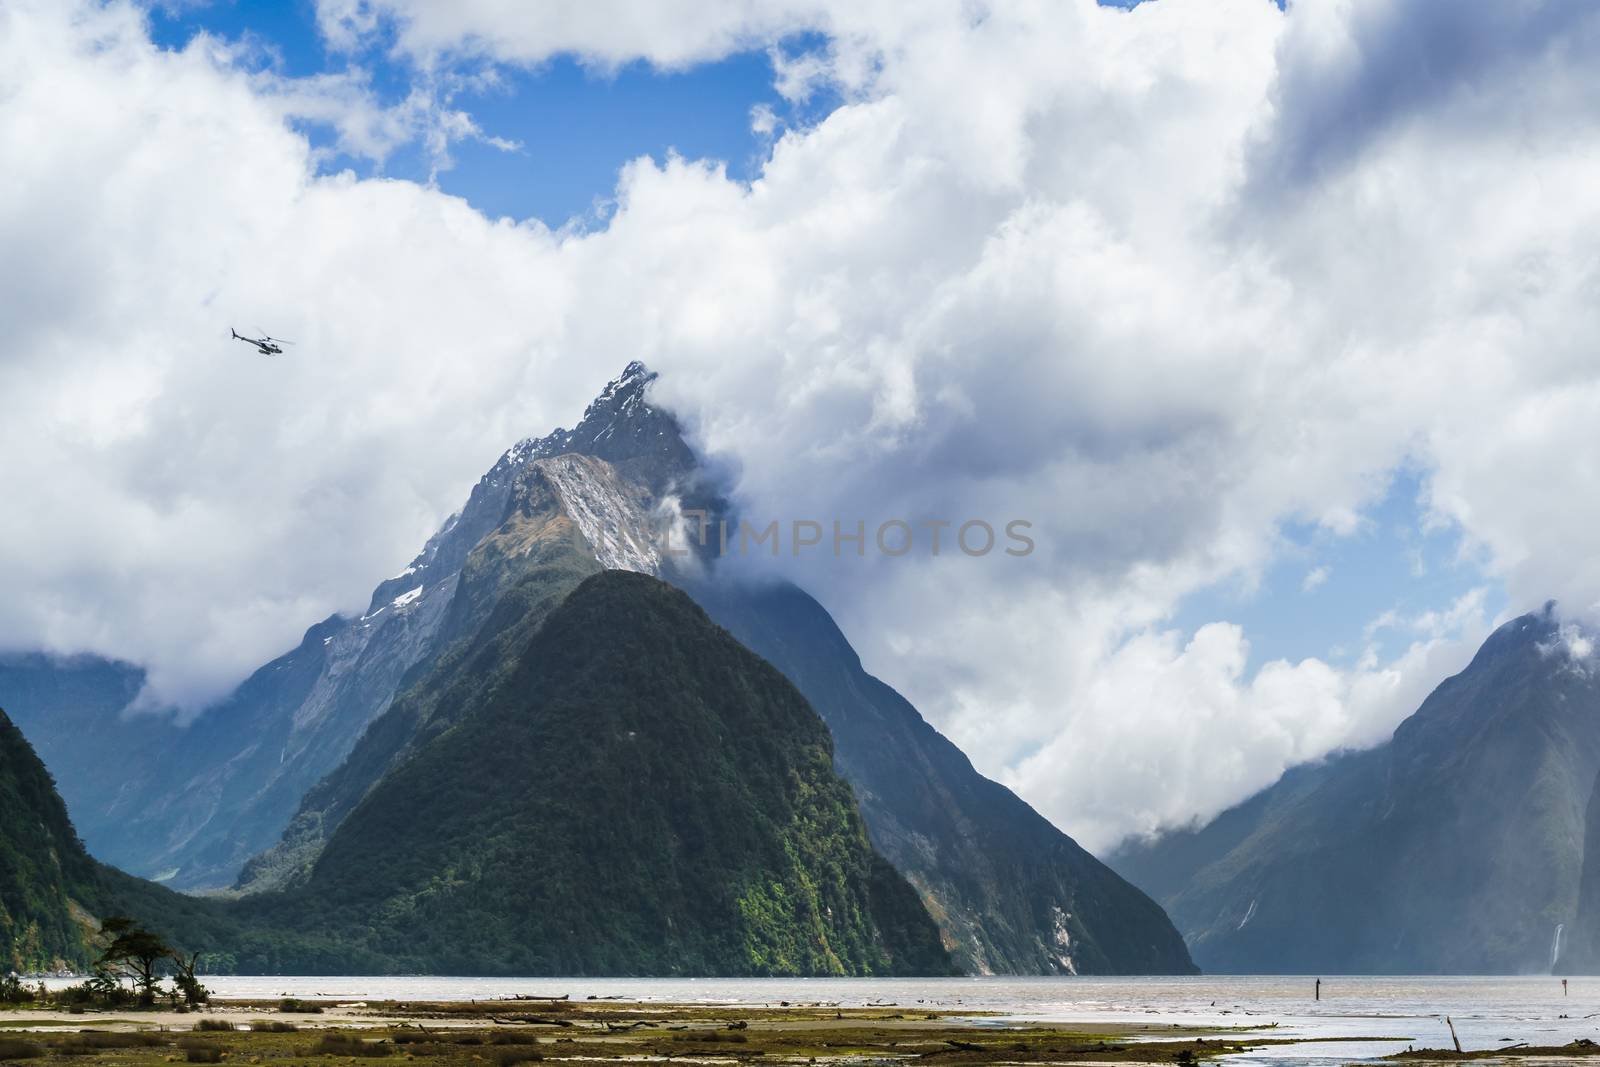 Helicopter flying over the valleys of the  Milford Sound. Helicopter dwarfed by the size of Mitre Peak mountain in the background shrouded by clouds.